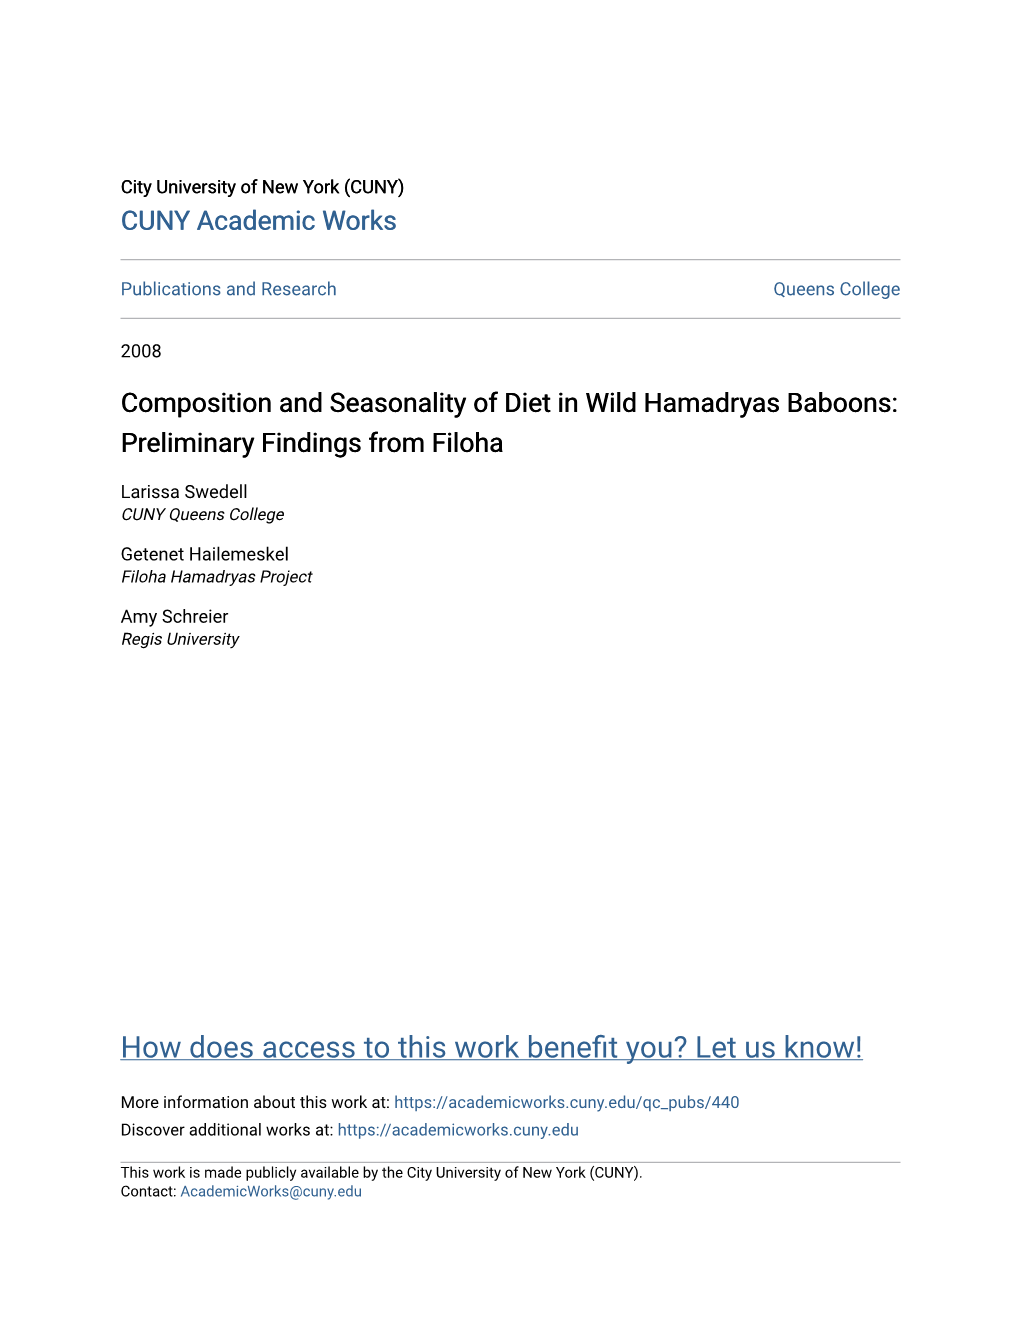 Composition and Seasonality of Diet in Wild Hamadryas Baboons: Preliminary Findings from Filoha